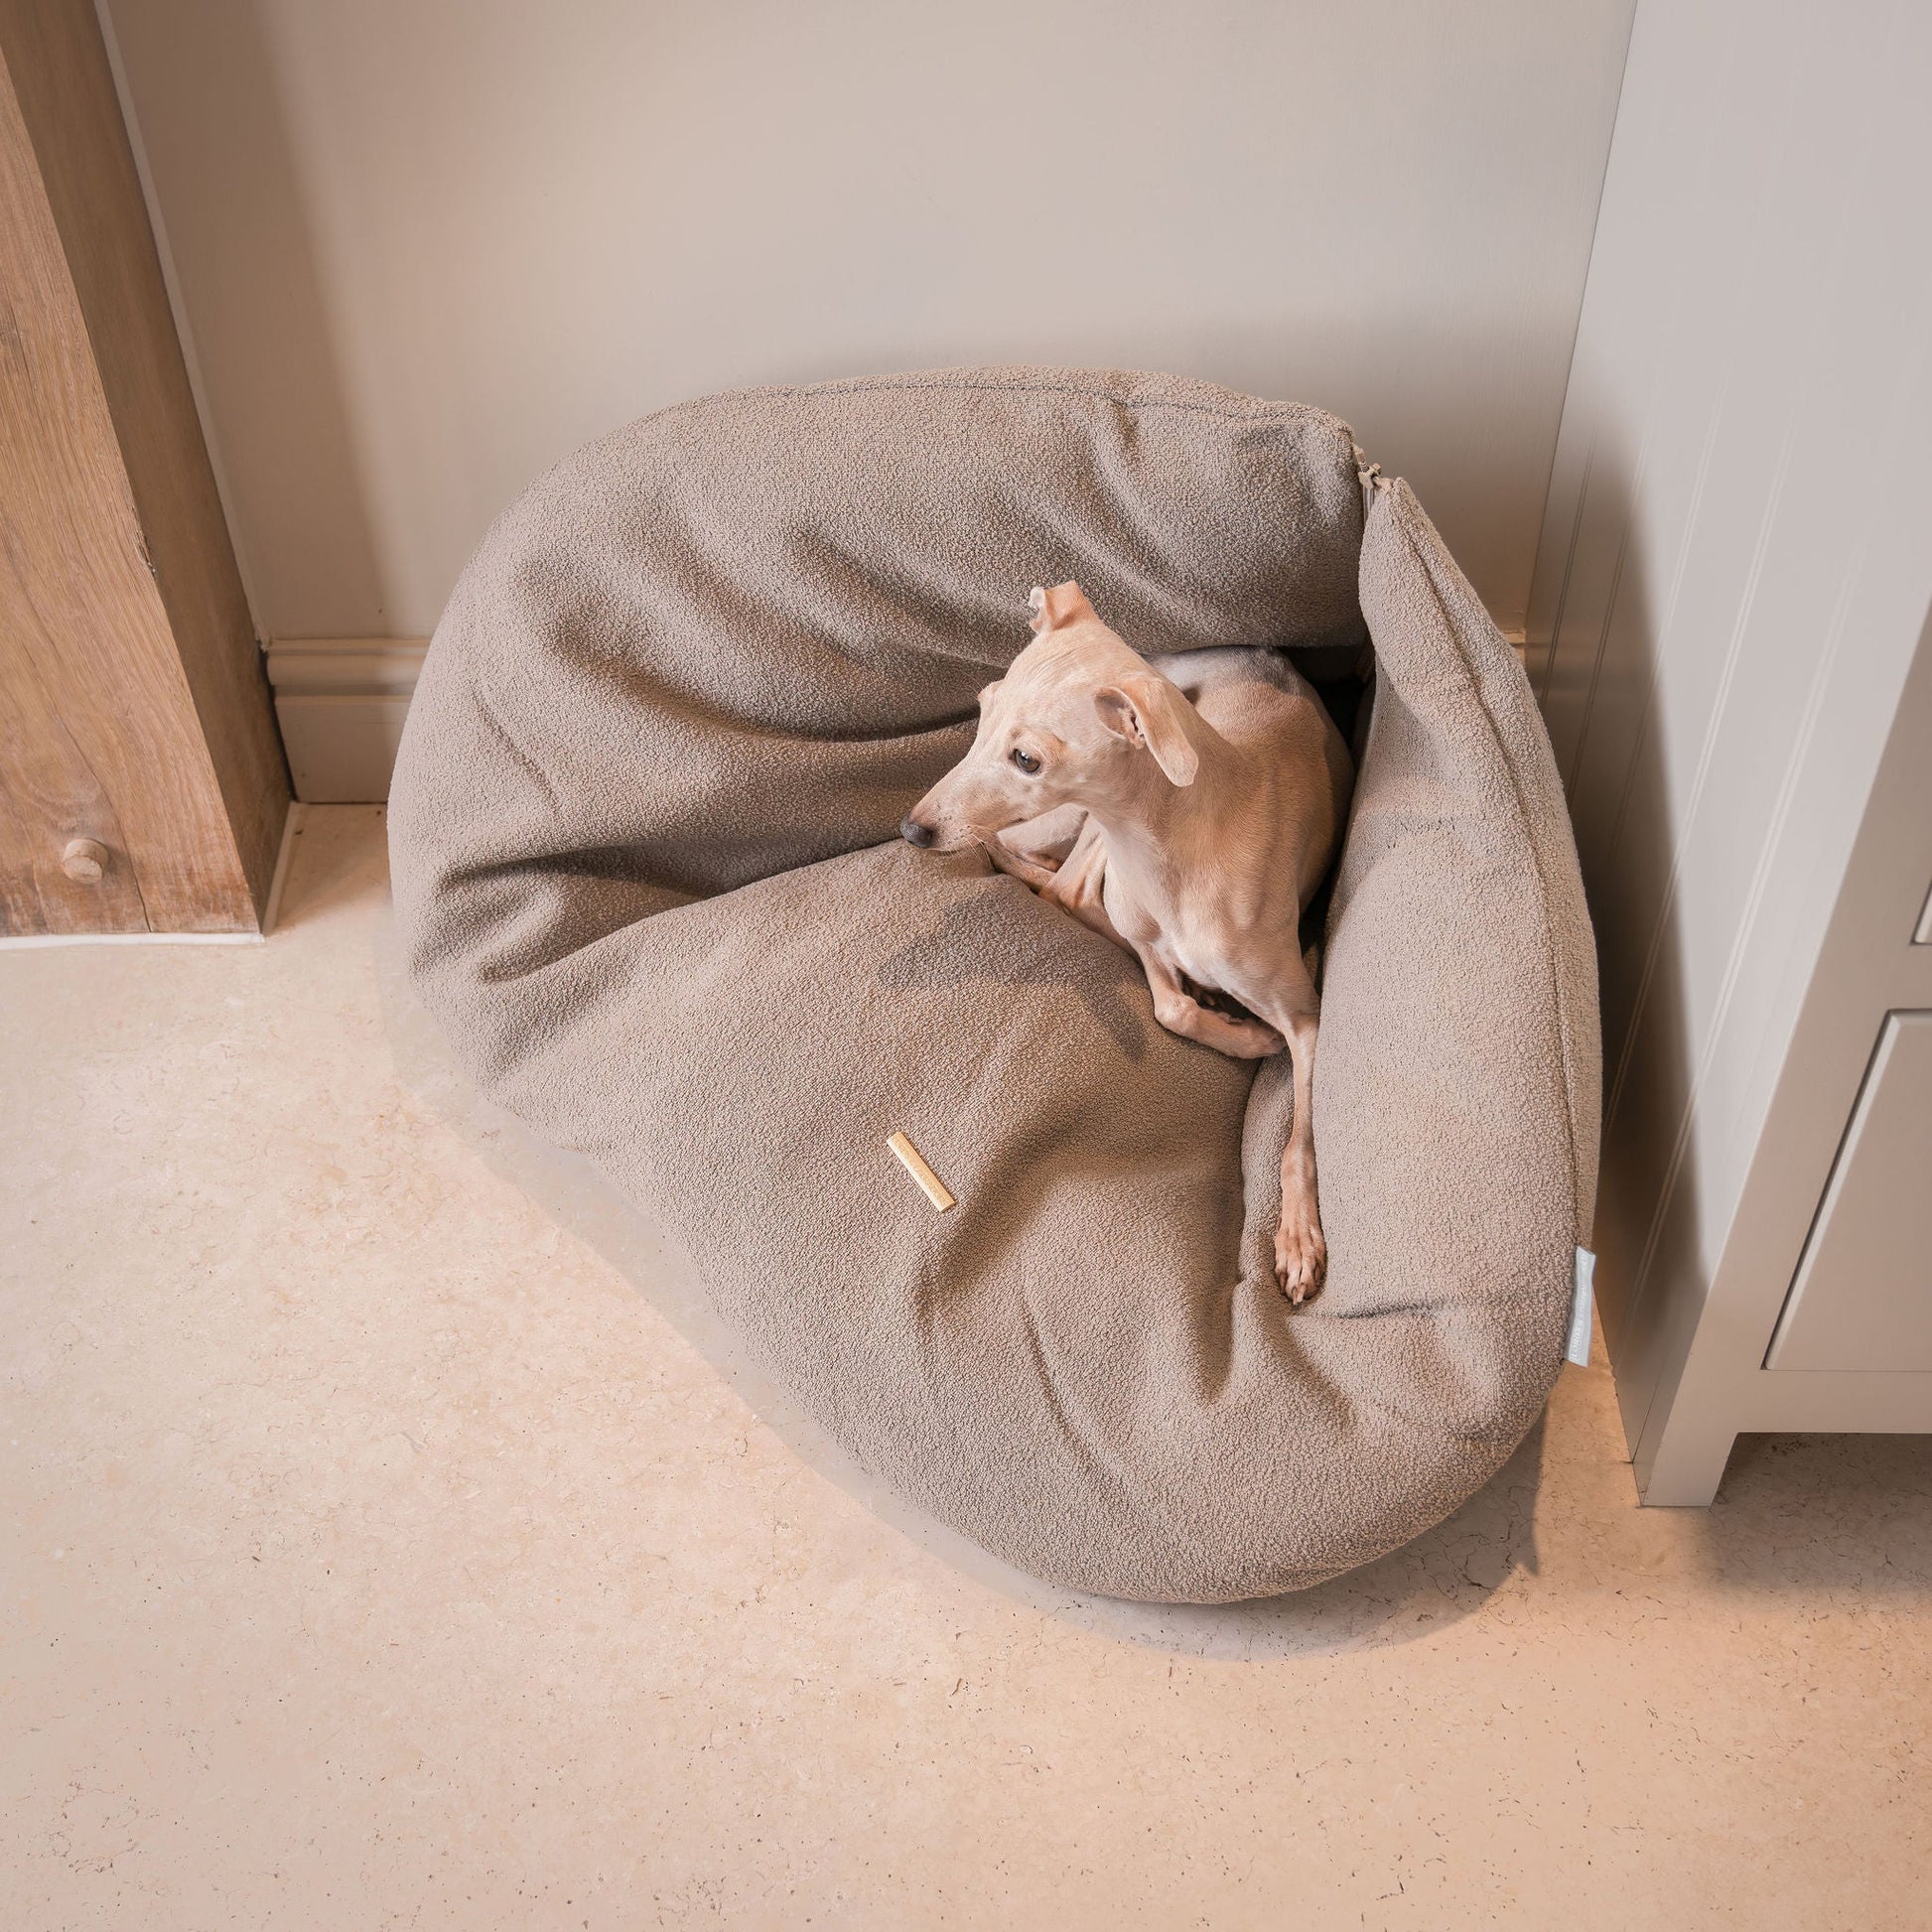 Luxury Dog Cushions & Beds, in Squash 'Em in Putty, The Perfect Snuggly Cave For Dogs To Burrow! Available Now at Lords & Labradors US